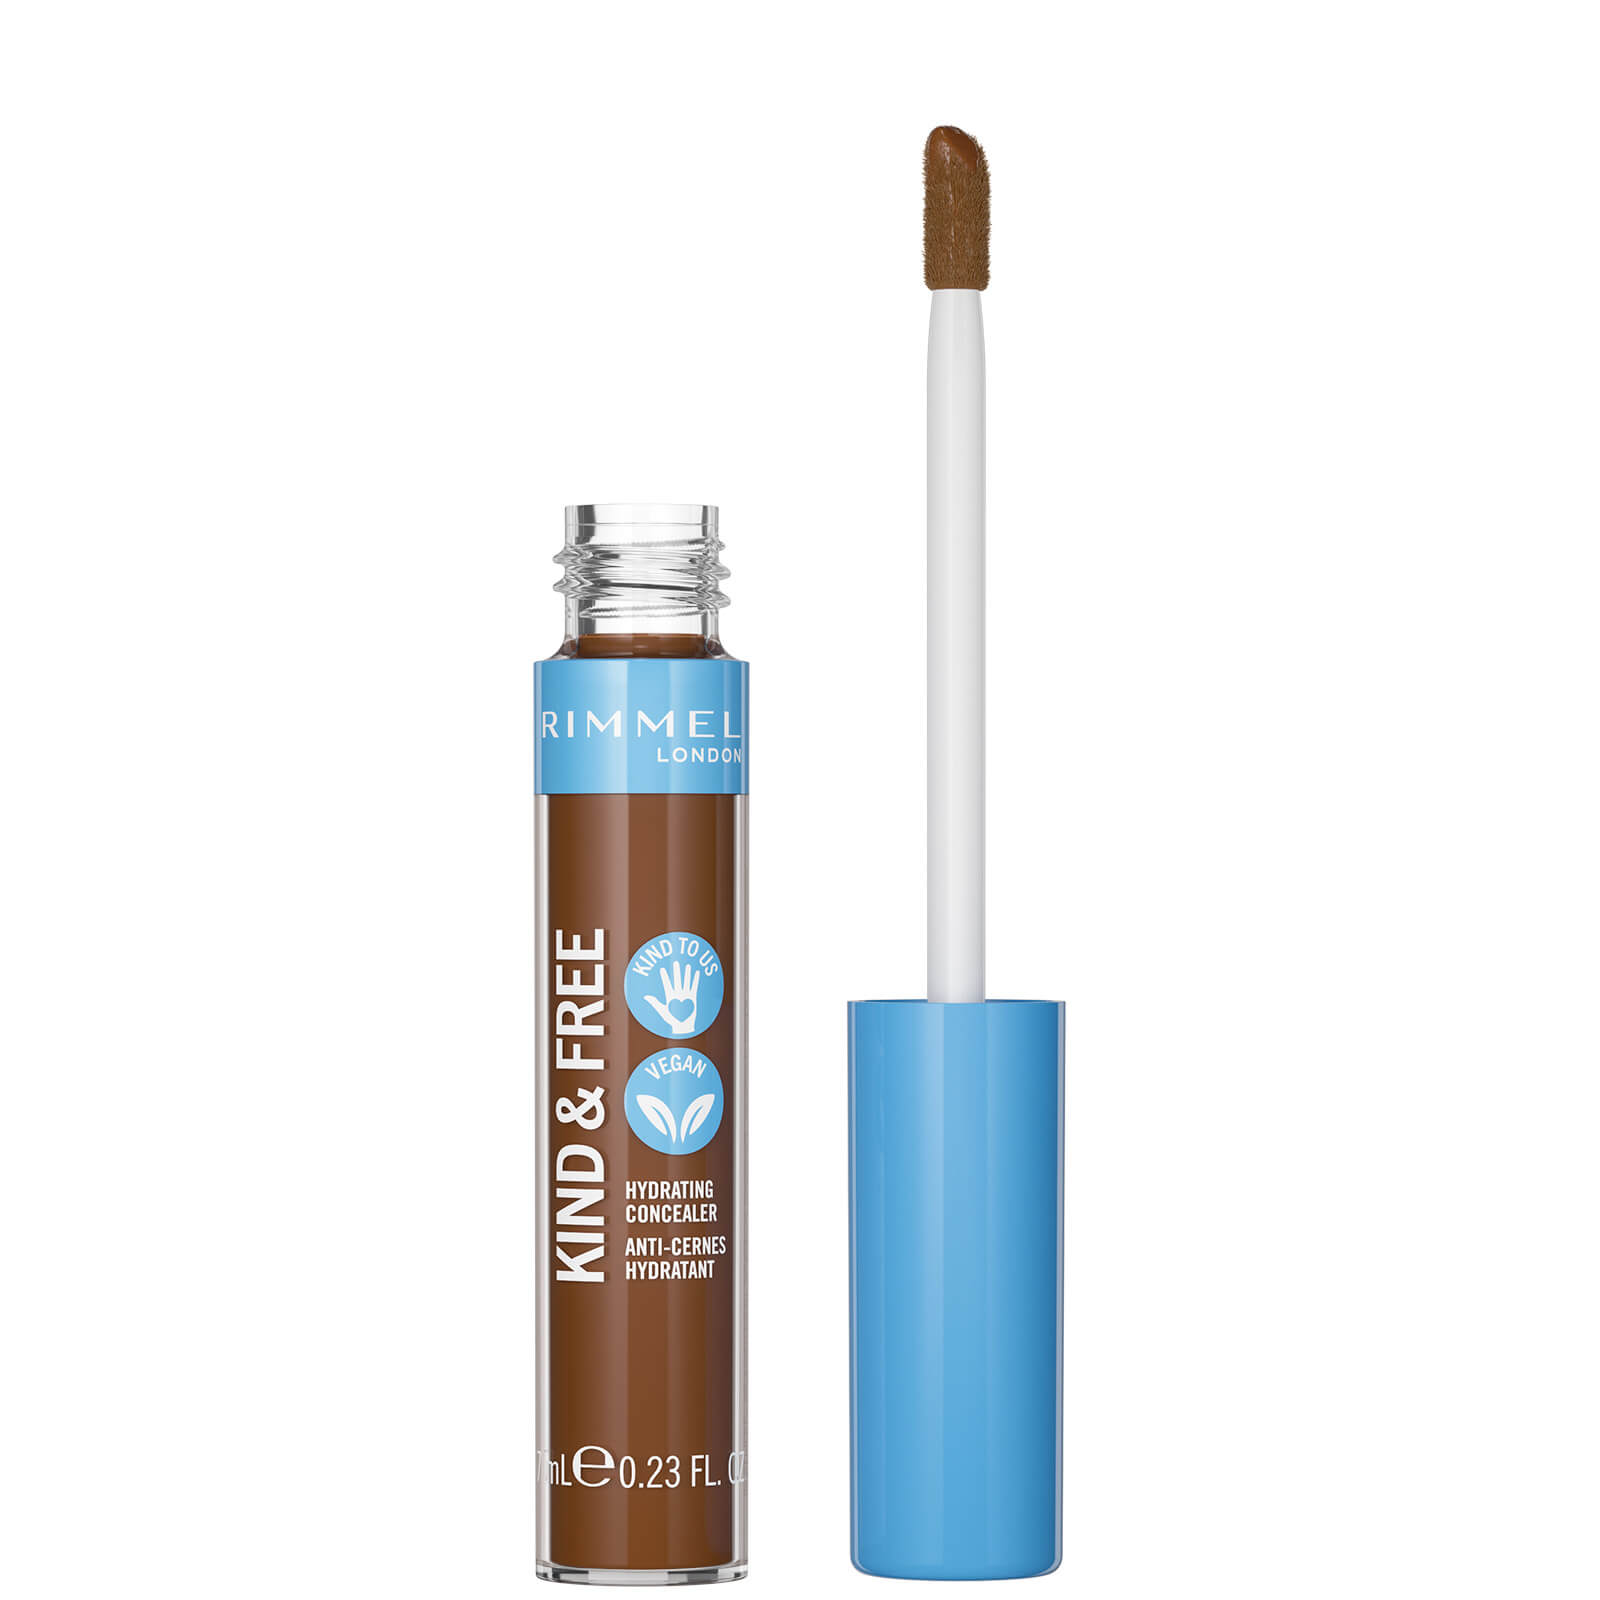 Rimmel Kind and Free Hydrating Concealer 7ml (Various Shades) - Deep